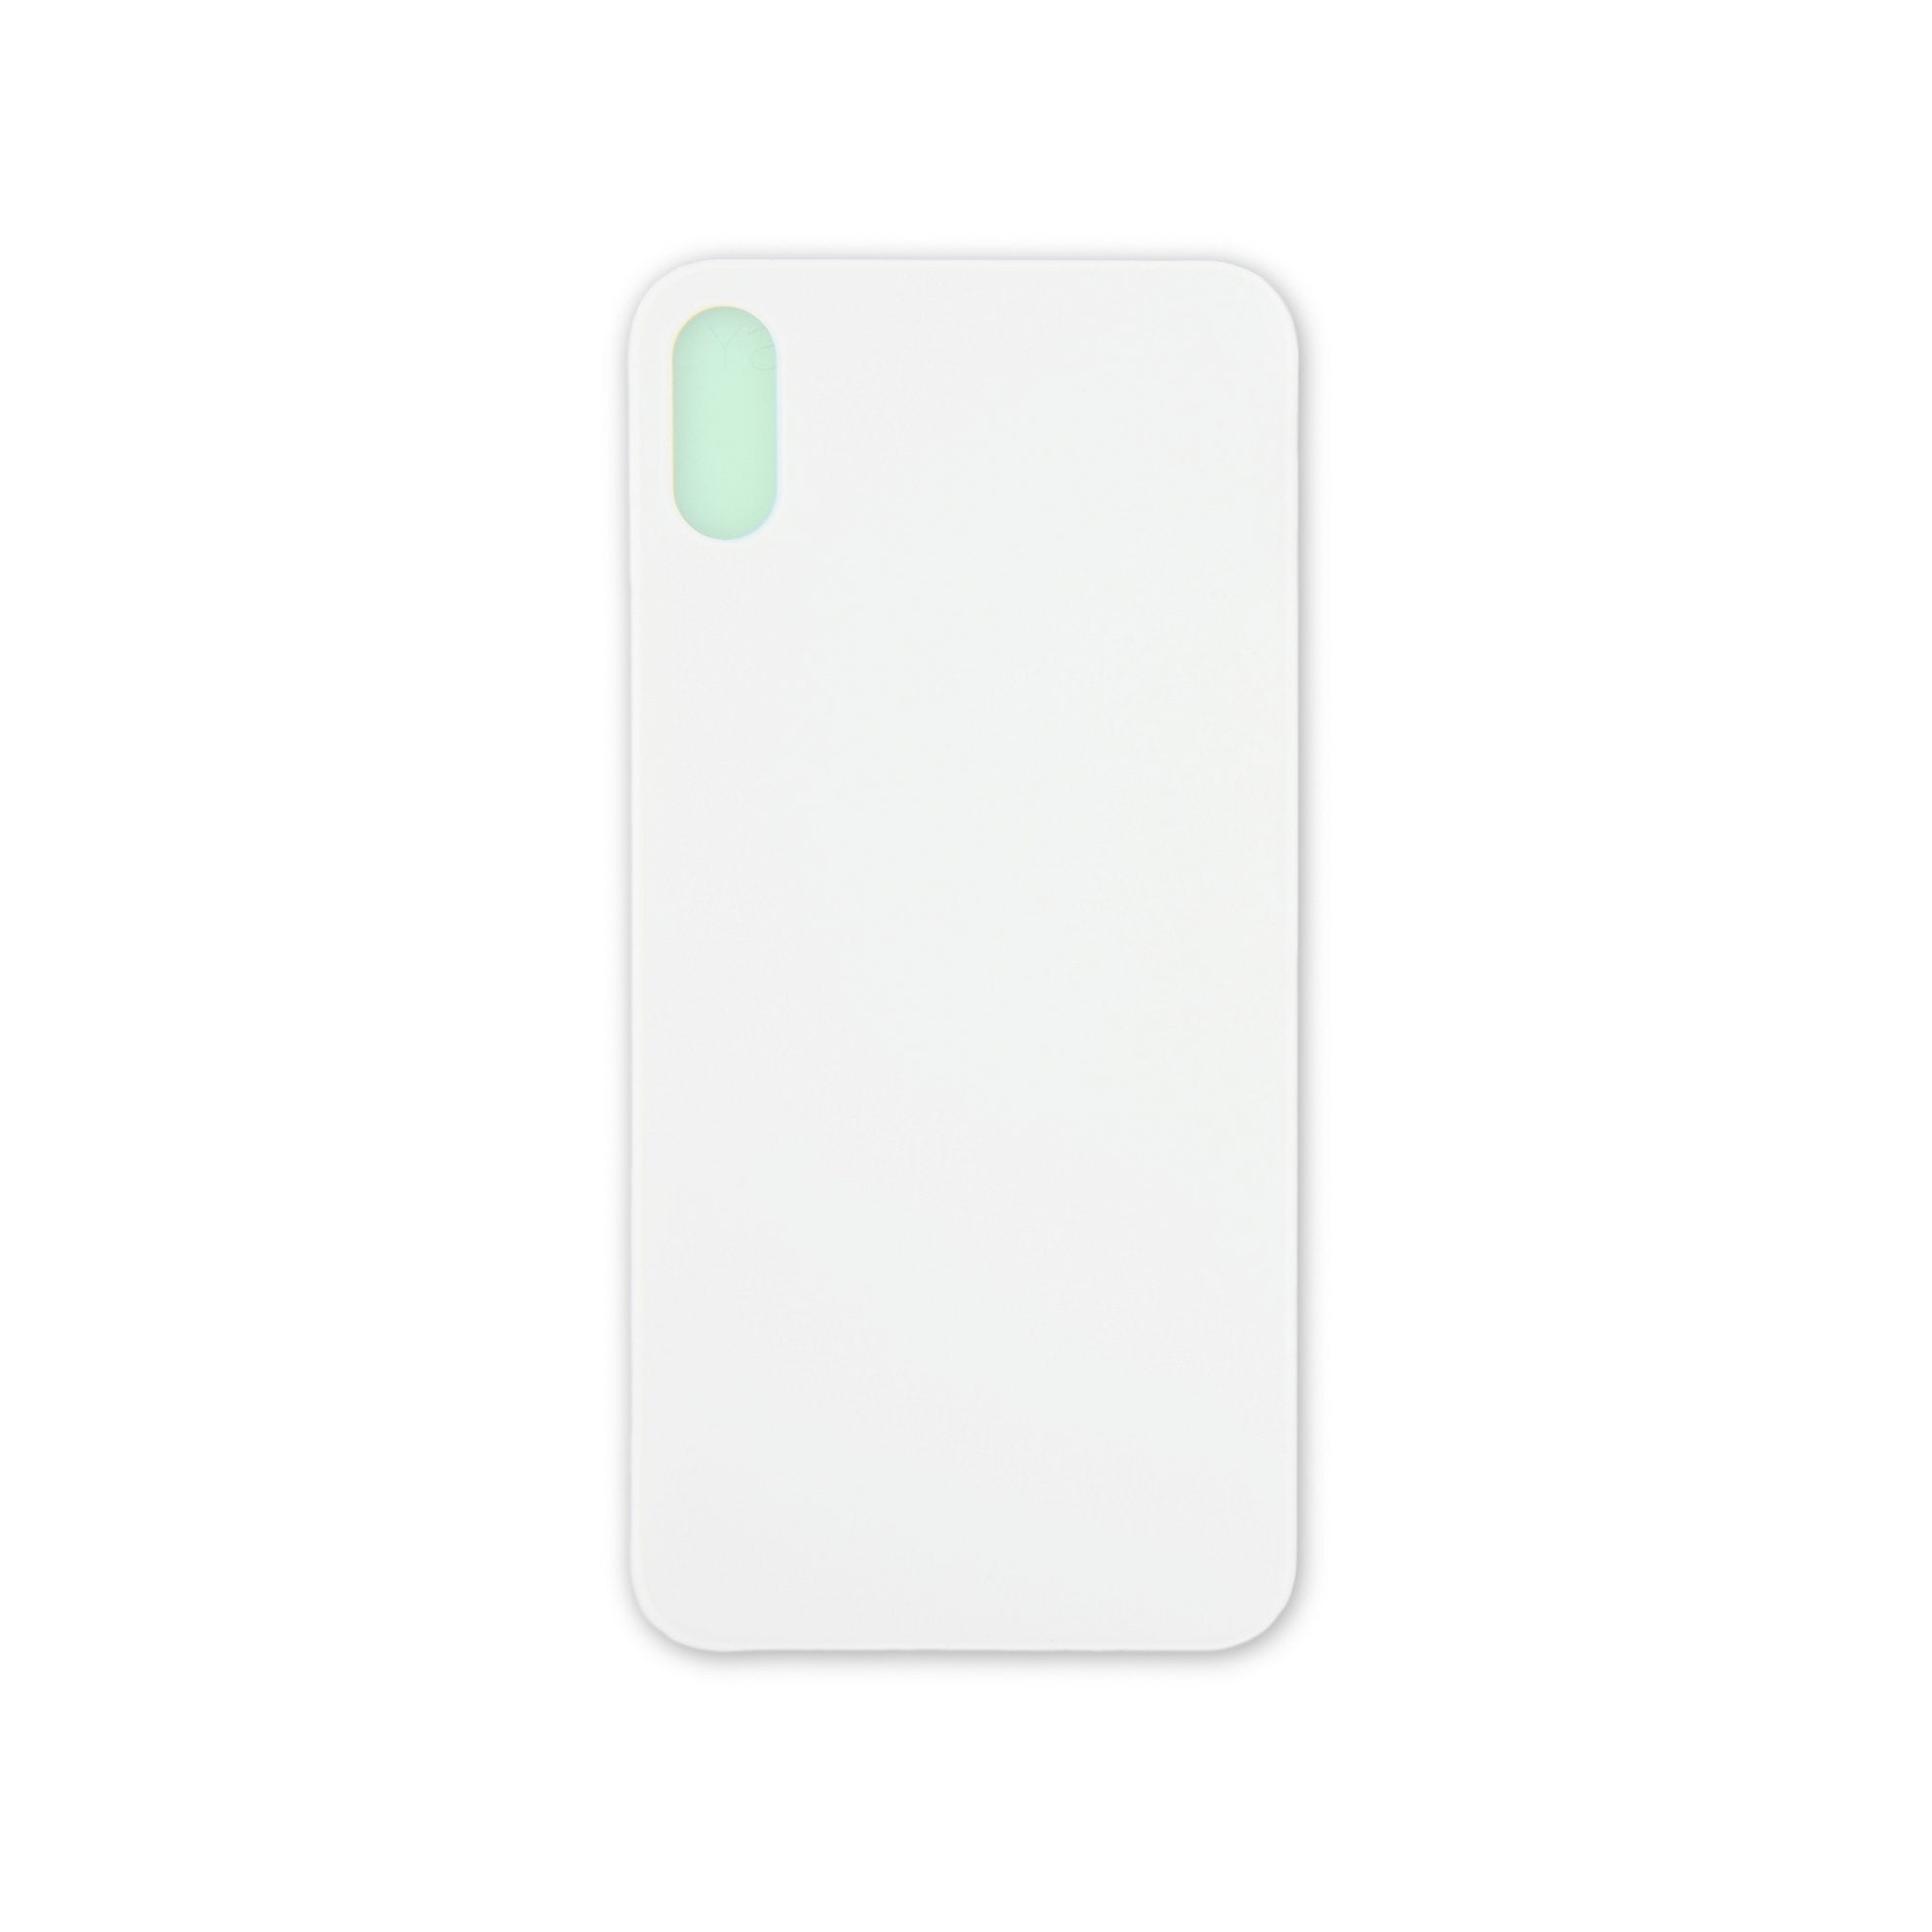 iPhone X Aftermarket Blank Rear Glass Panel White New